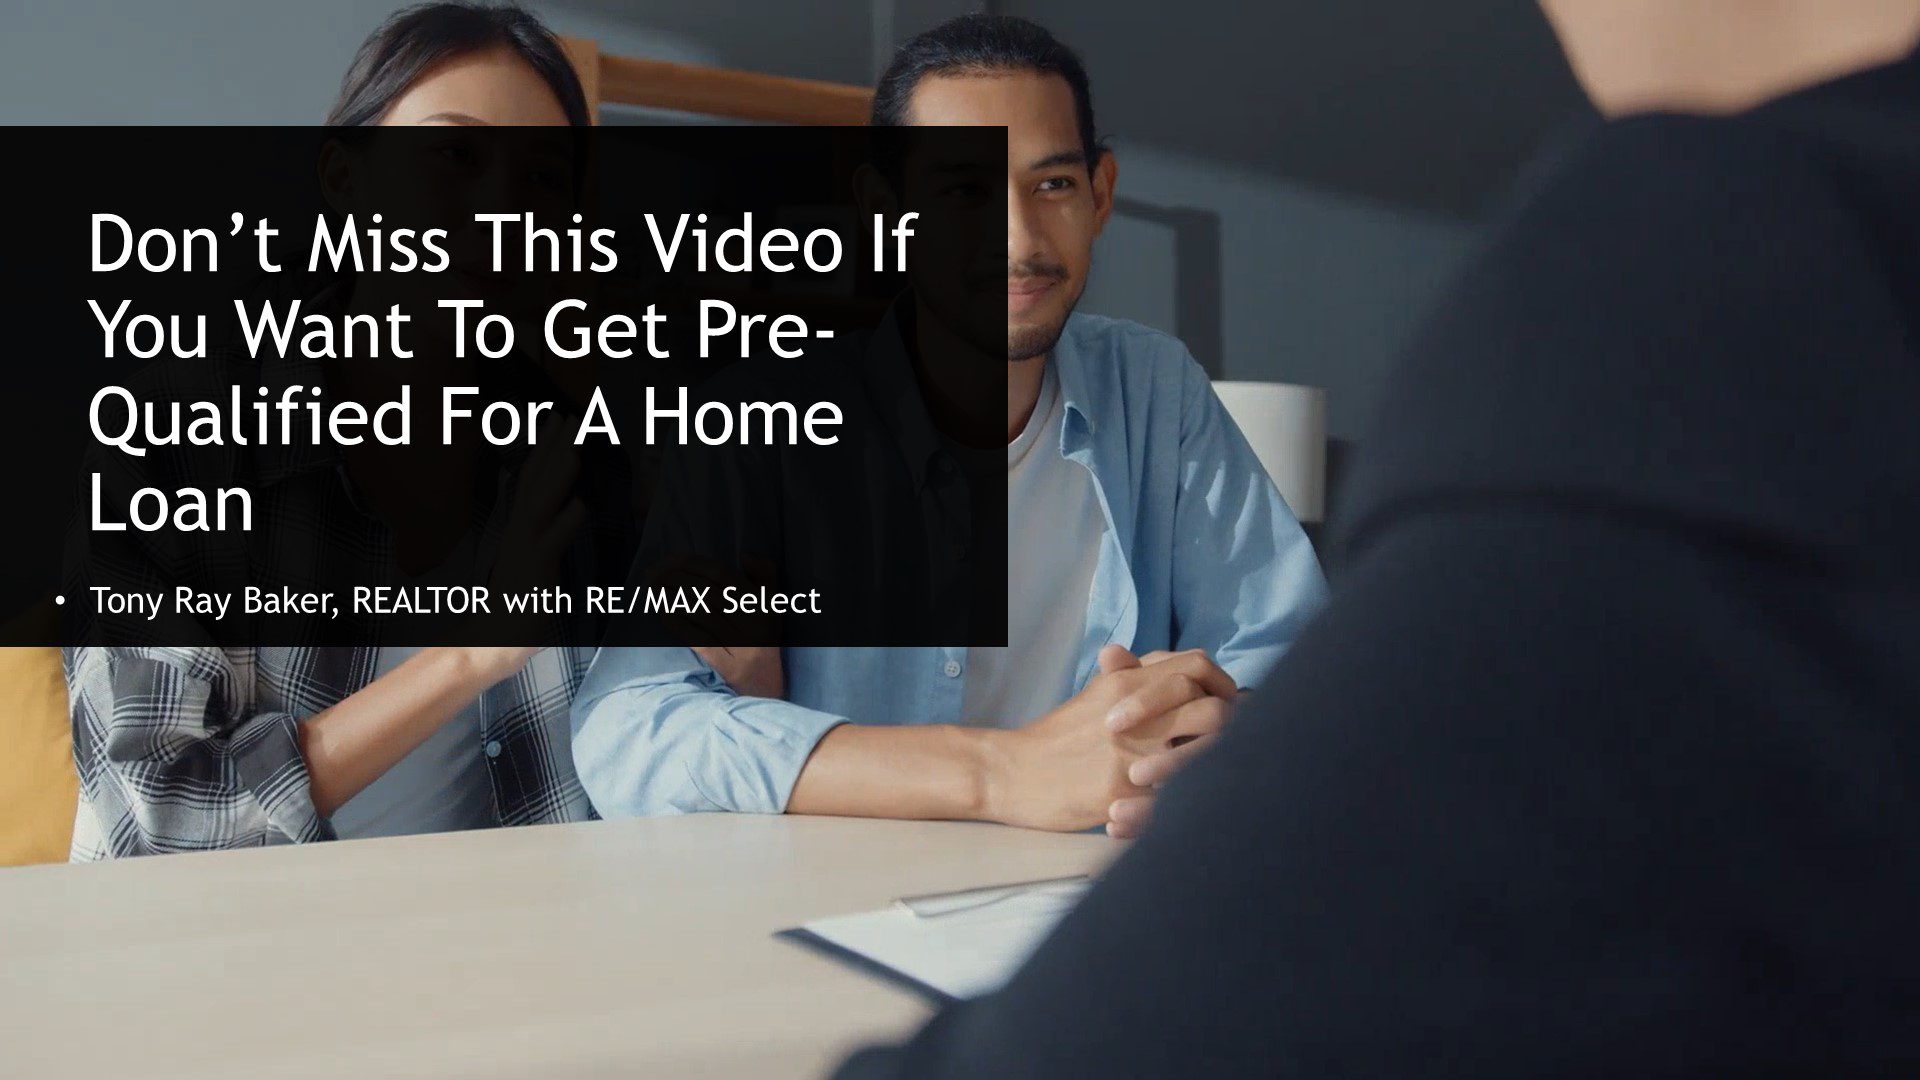 Don’t Miss This Video If You Want To Get Pre Qualified For A Home Loan